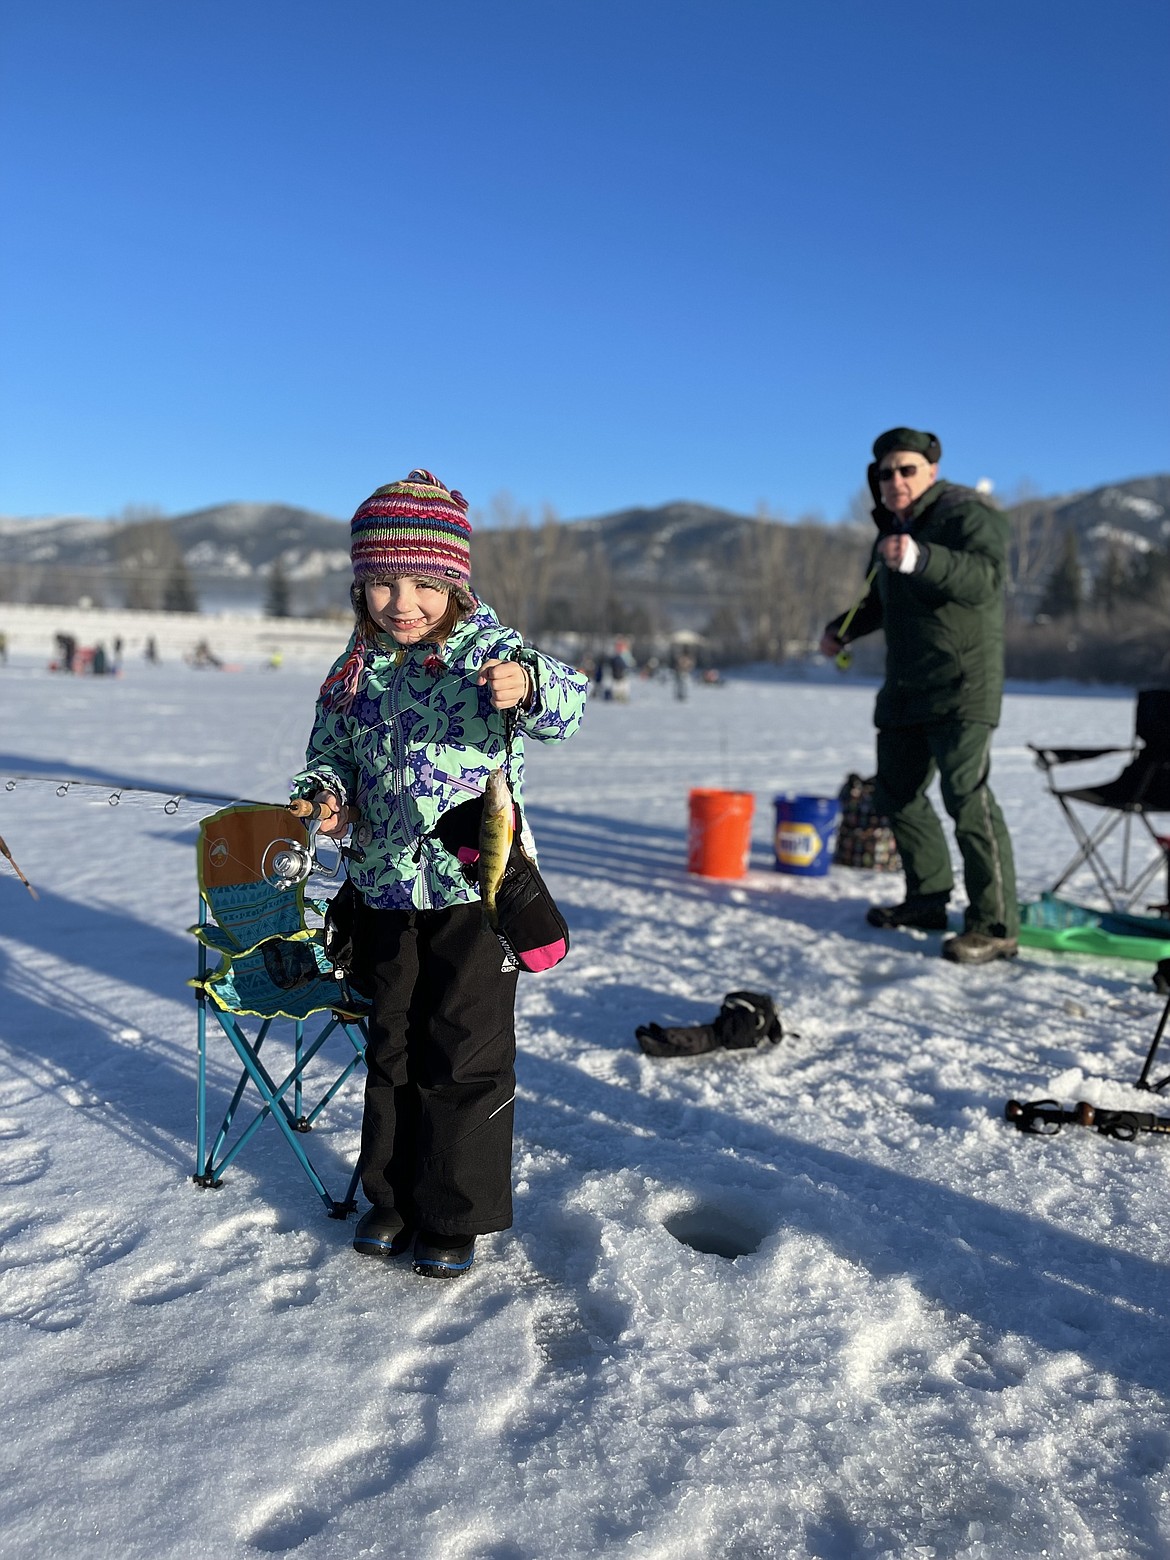 Penelope Tomascak with her grandpa Walt Tomascak from Frenchtown were delighted to be catching perch on Saturday during the annual Kids Fishing Clinic on Frenchtown Pond. The event is sponsored by Youth in the Outdoors each year with over 150 kids participating. (Picture by Kathy Salisbury)